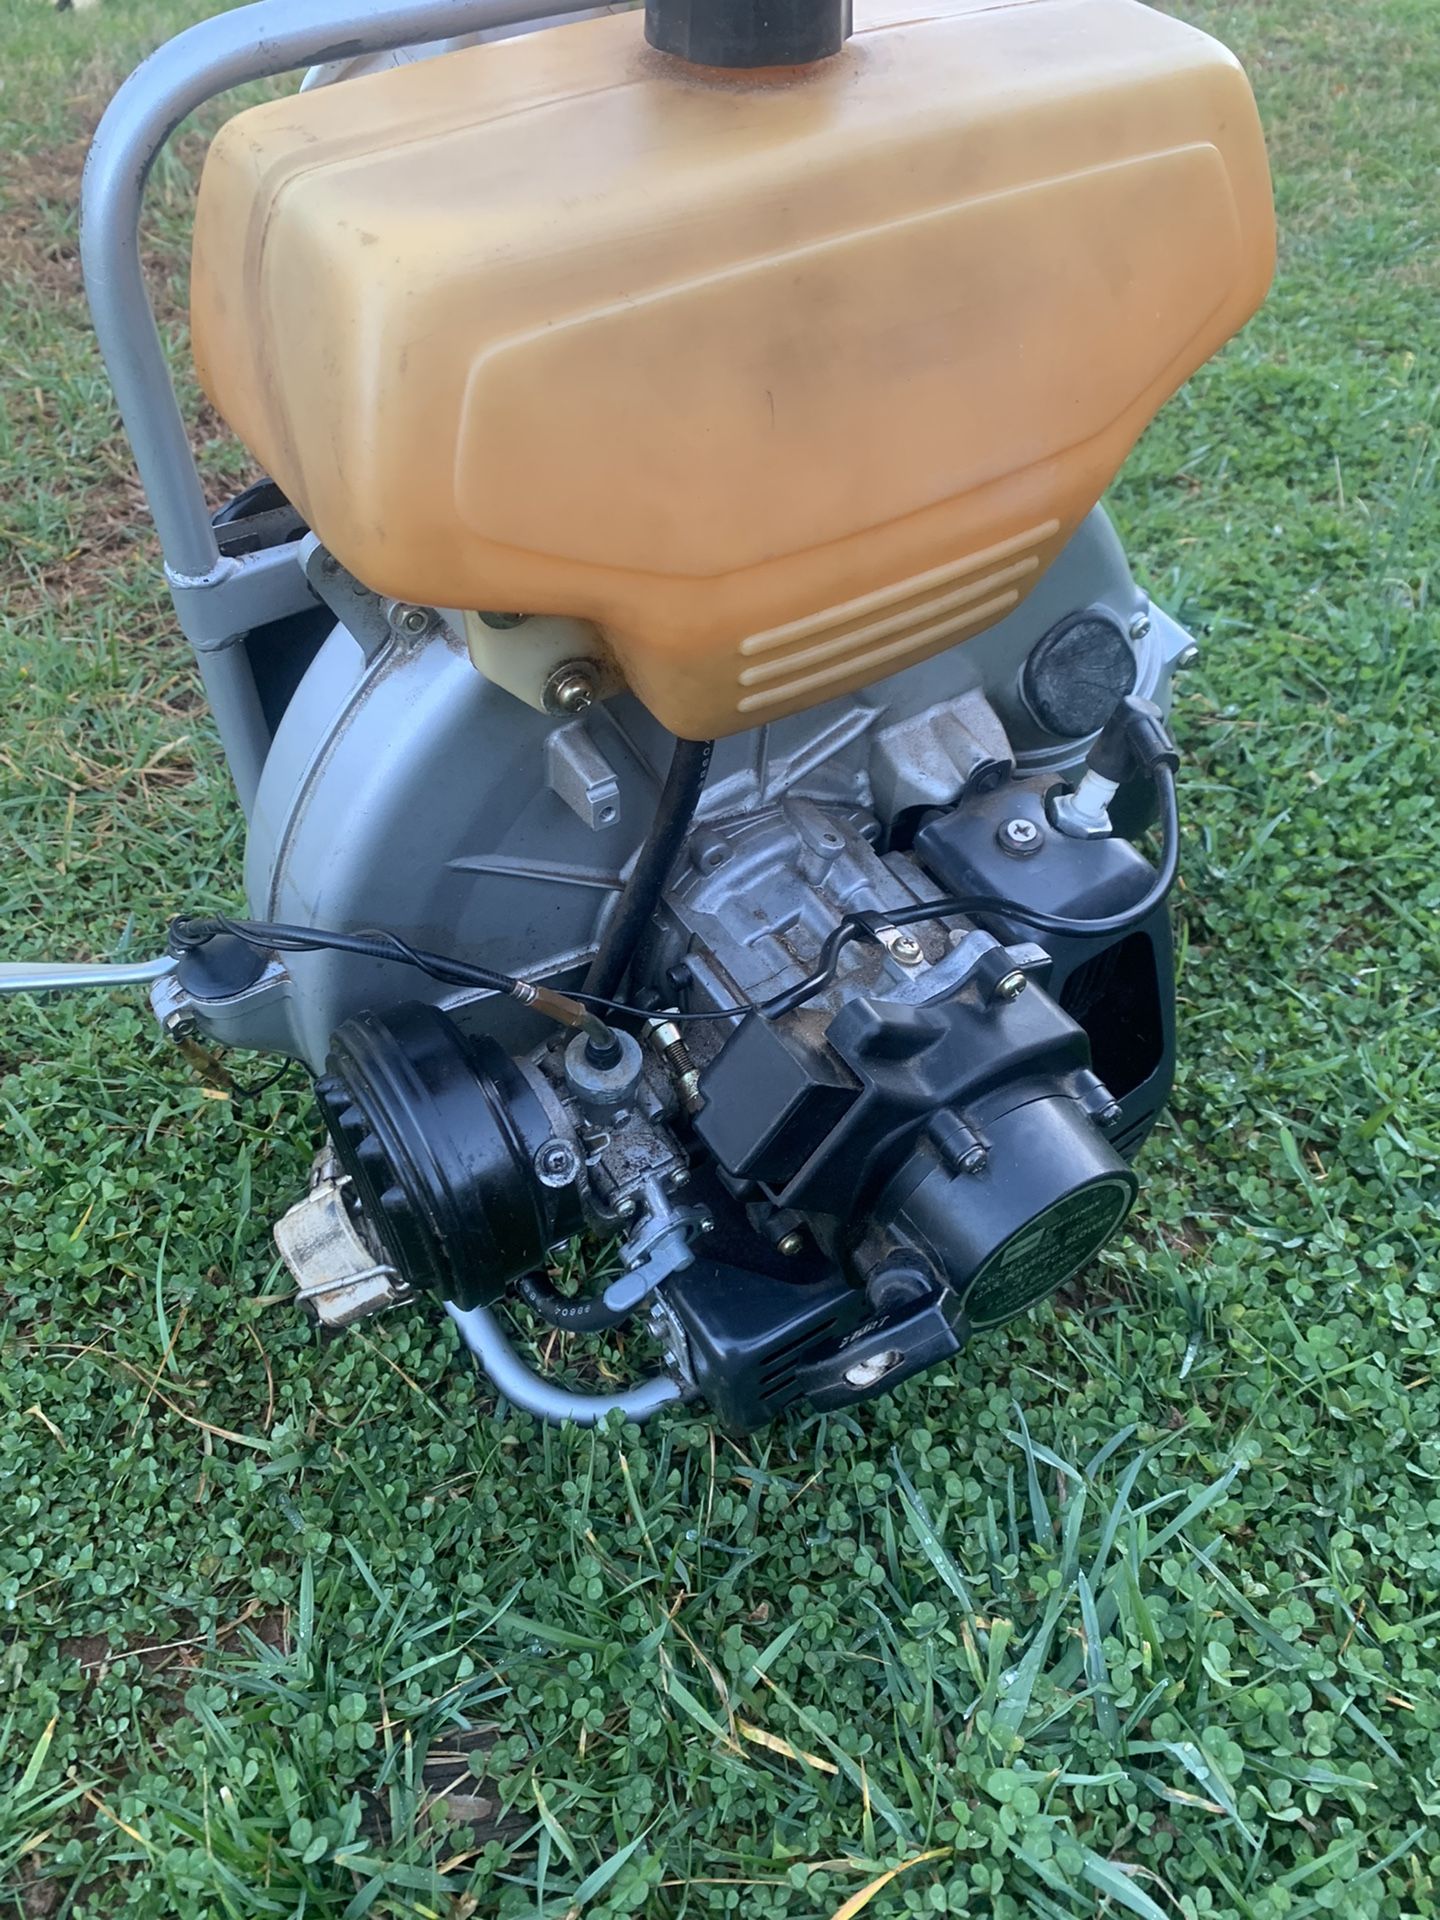 Sears Craftsman 37.7 cc (1980s) Old school backpack leaf blower blower, 2-cycle gas engine,made in Japan, 